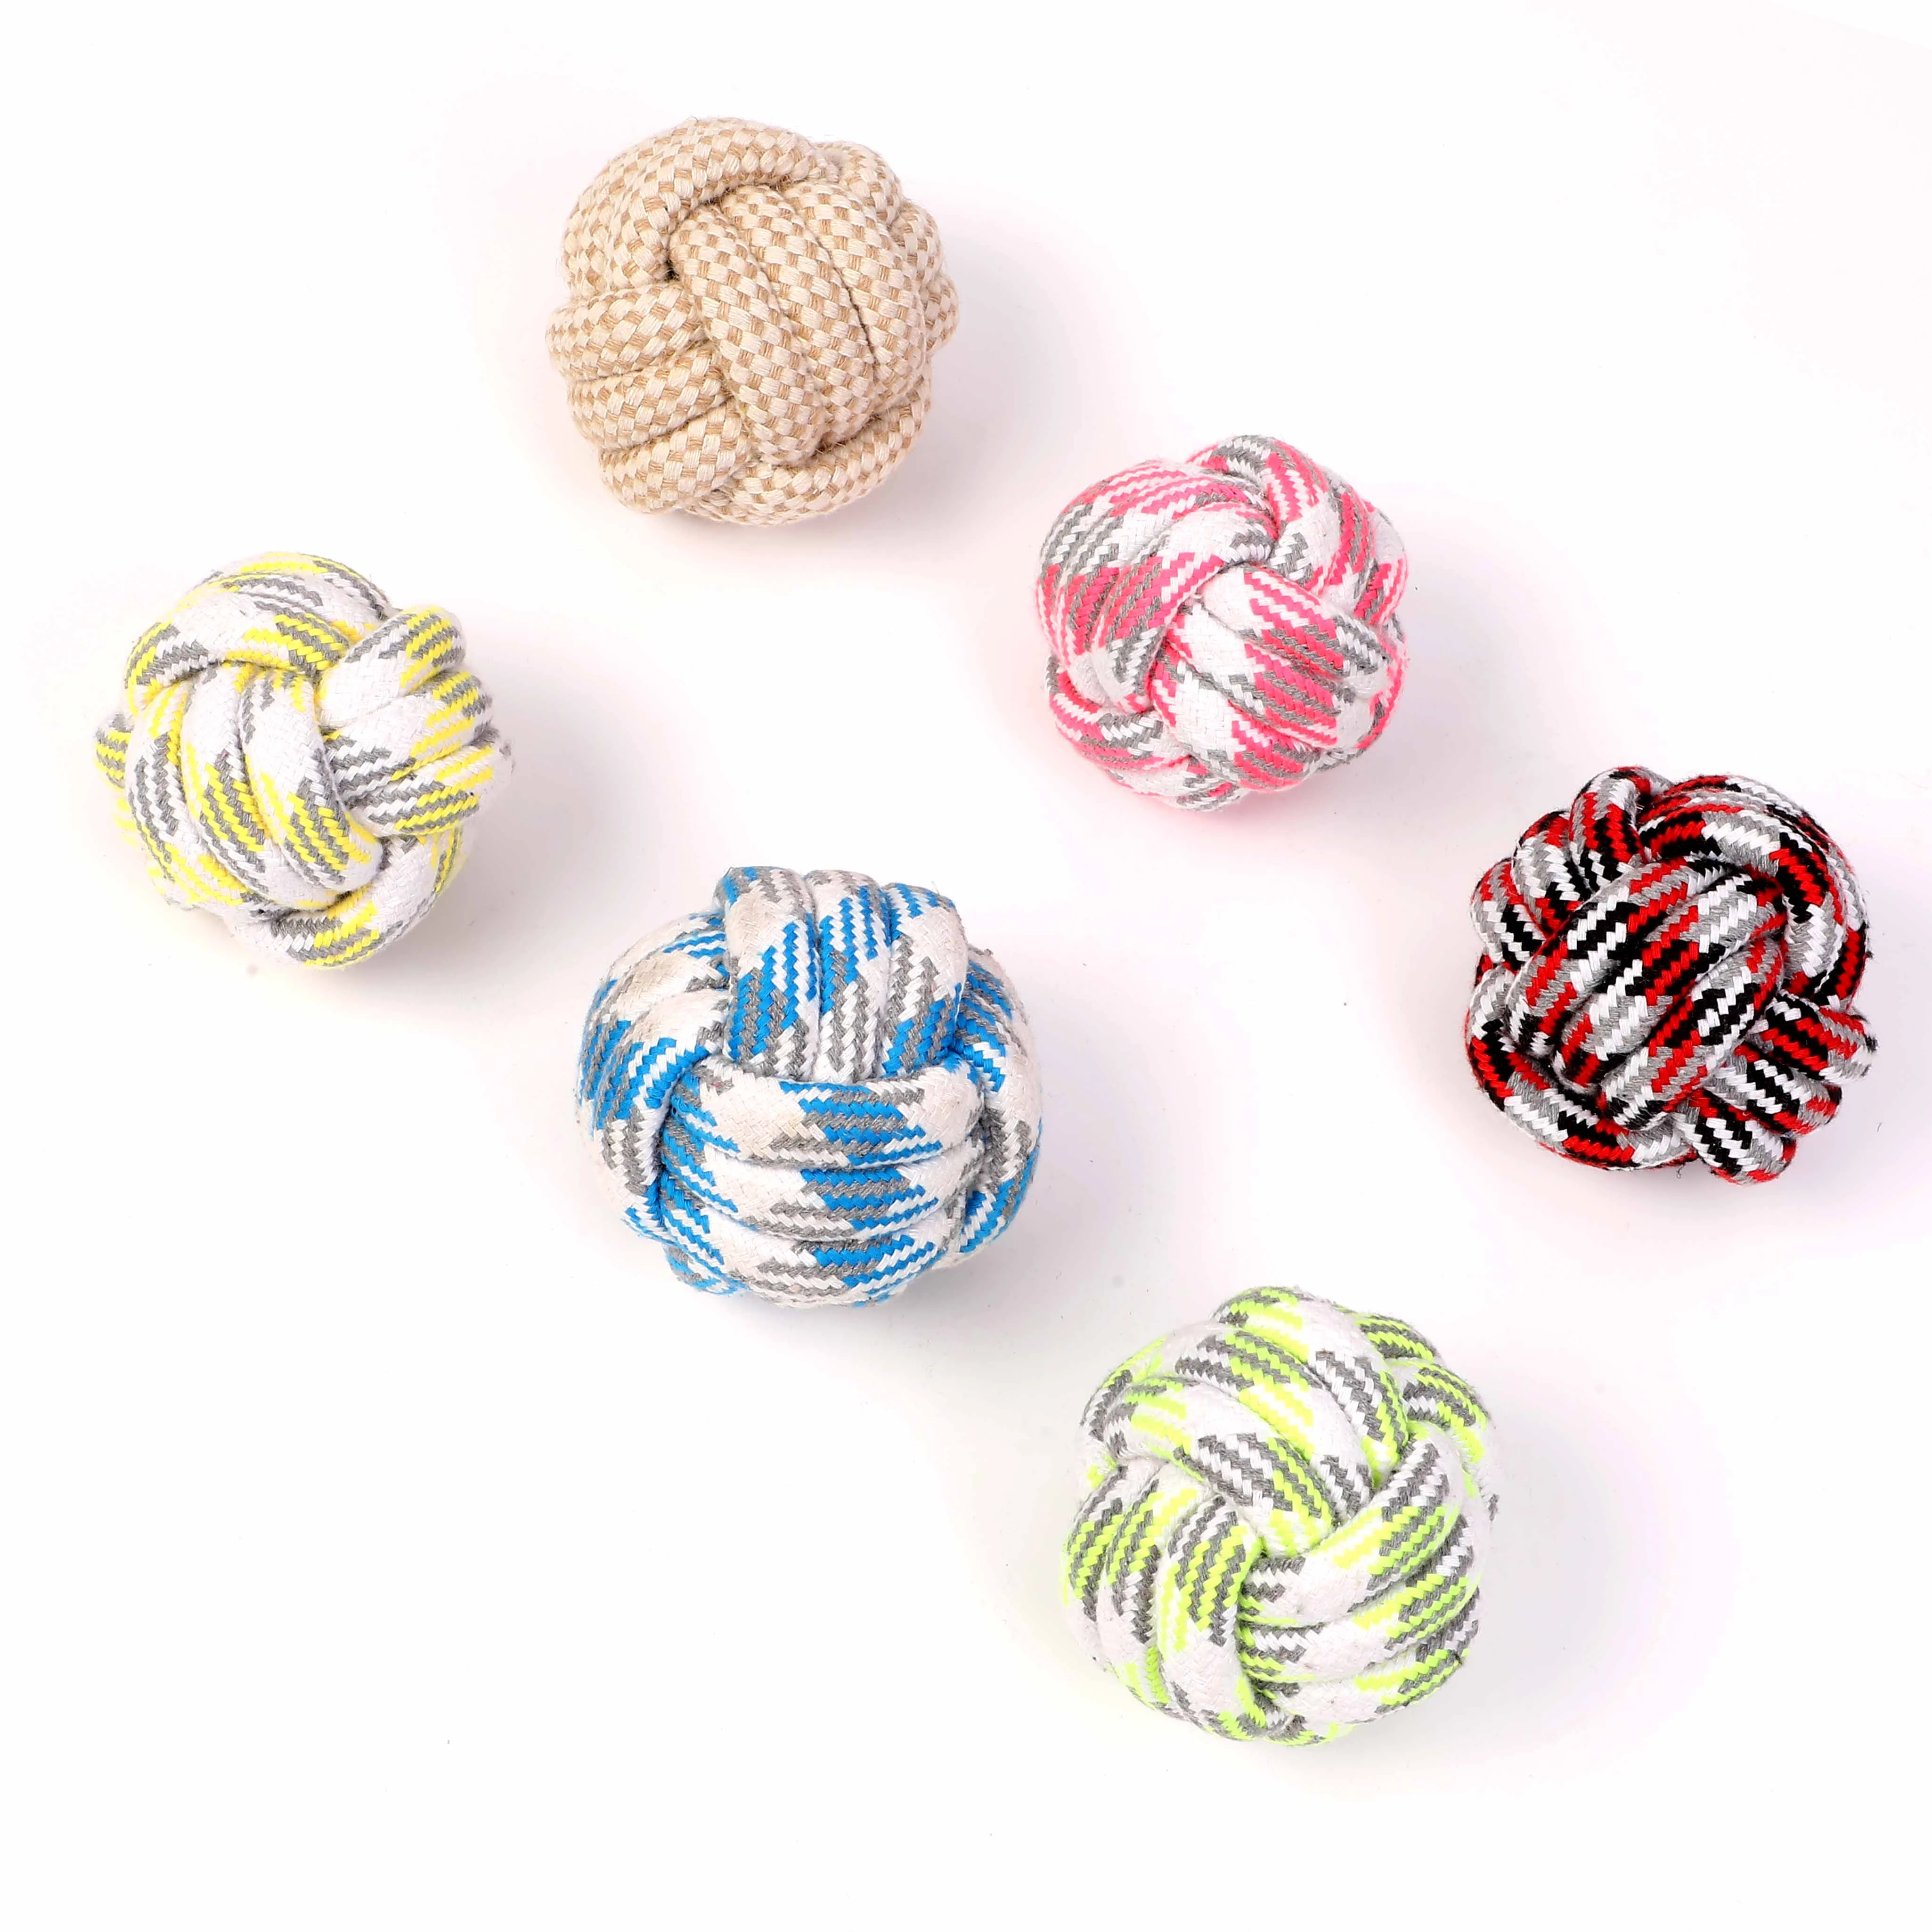 Wholesale Durable Pet toss fetch games toy Natural Cotton Ropes balls Chew Toys natural cotton fibers rope Chew Toy